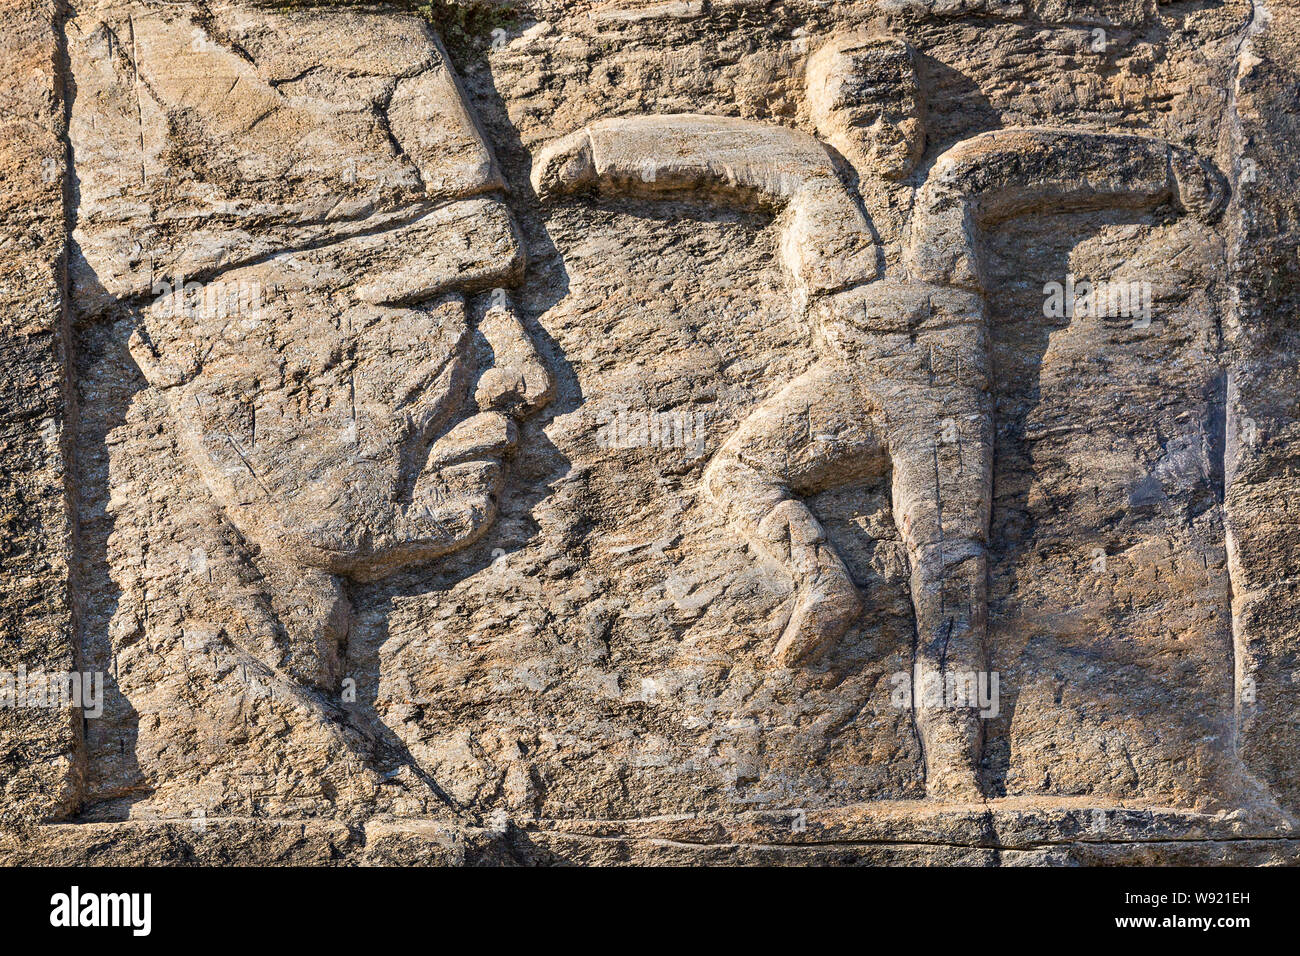 Sculpture over a rock wall representing Ataturk and a person performing local folk dance of Zeybek, in Birgi, Turkey. Stock Photo